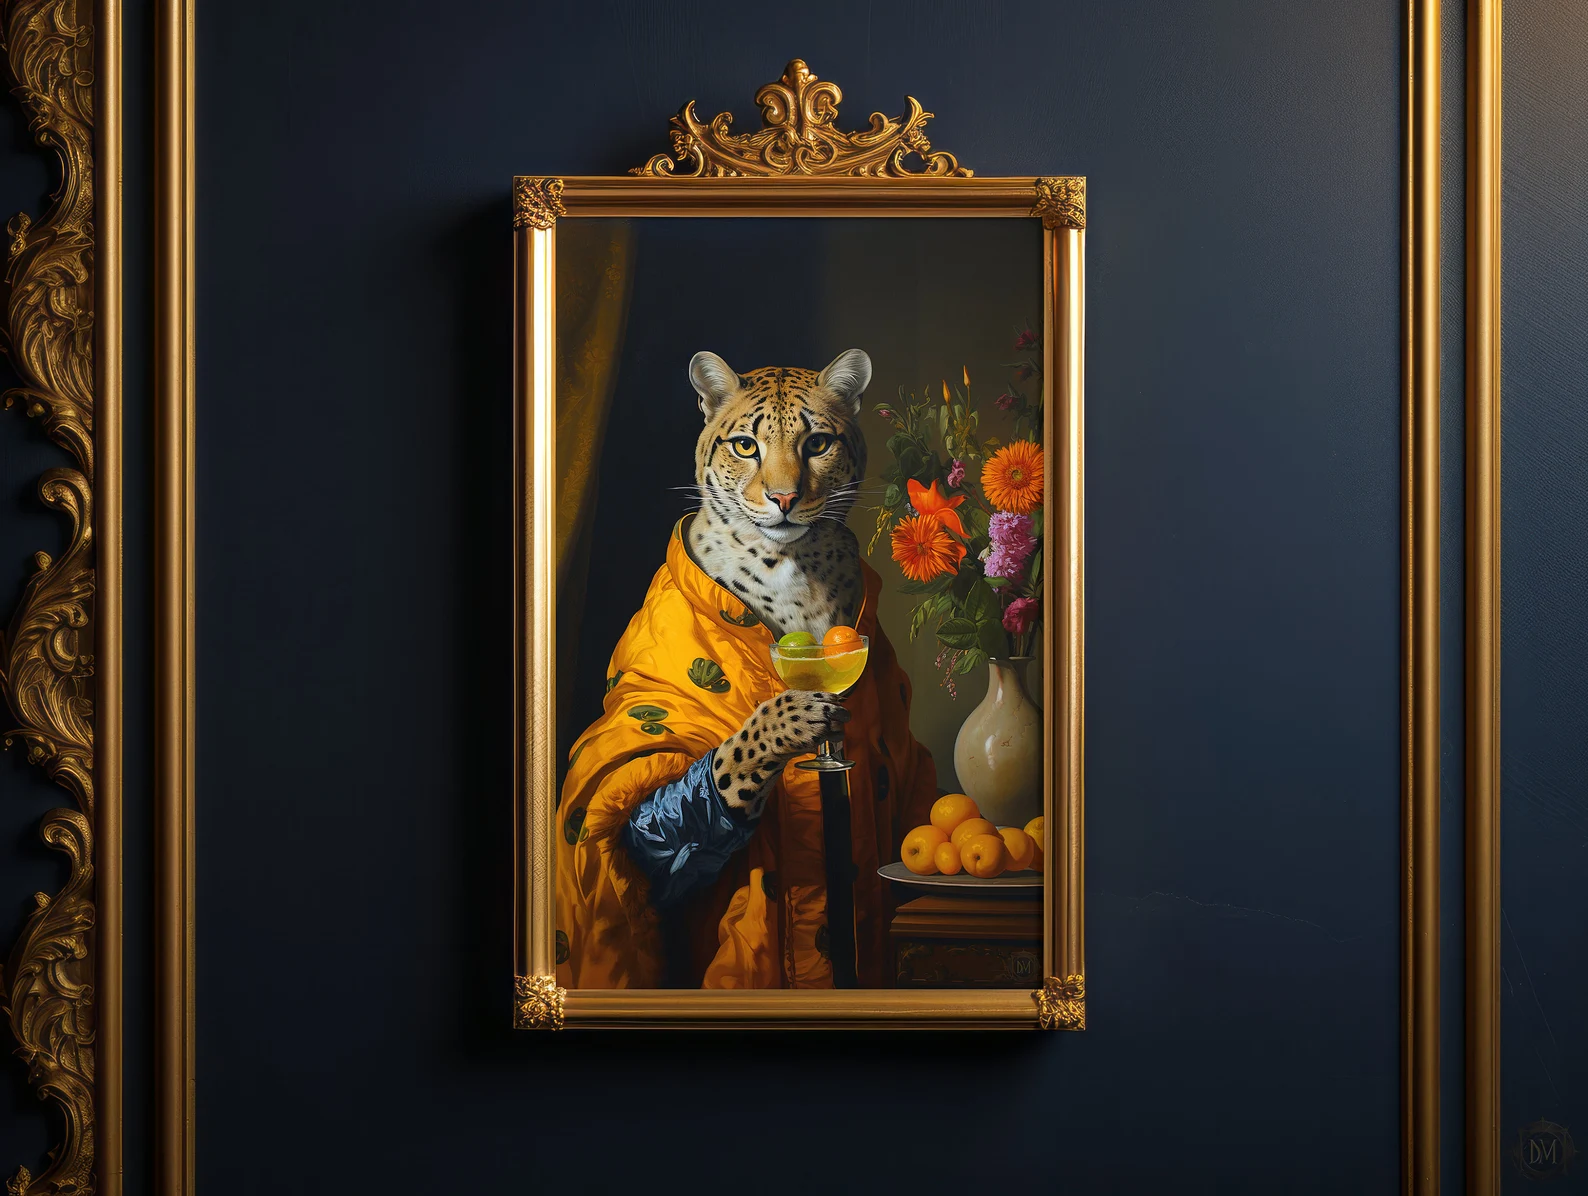 Dark Academia Wall Art of Flemish Still Life Fashion Leopard Painting Animal Print Hanging on Blue Color Wall in a Gold Baroque Frame